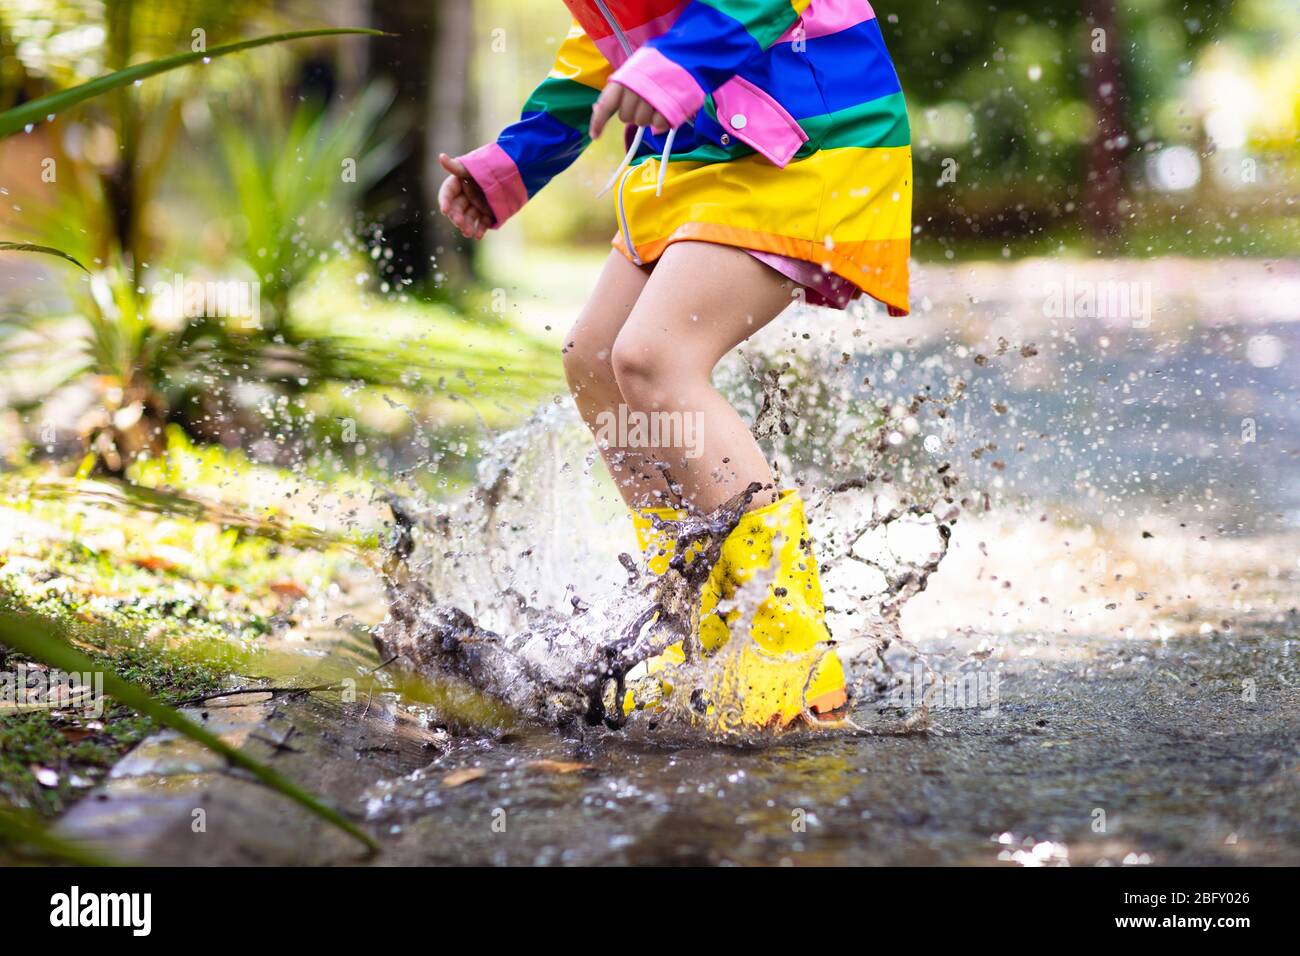 Kid playing in the rain in autumn park. Child jumping in muddy puddle on rainy fall day. Little girl in rain boots and rainbow jacket outdoors in heav Stock Photo